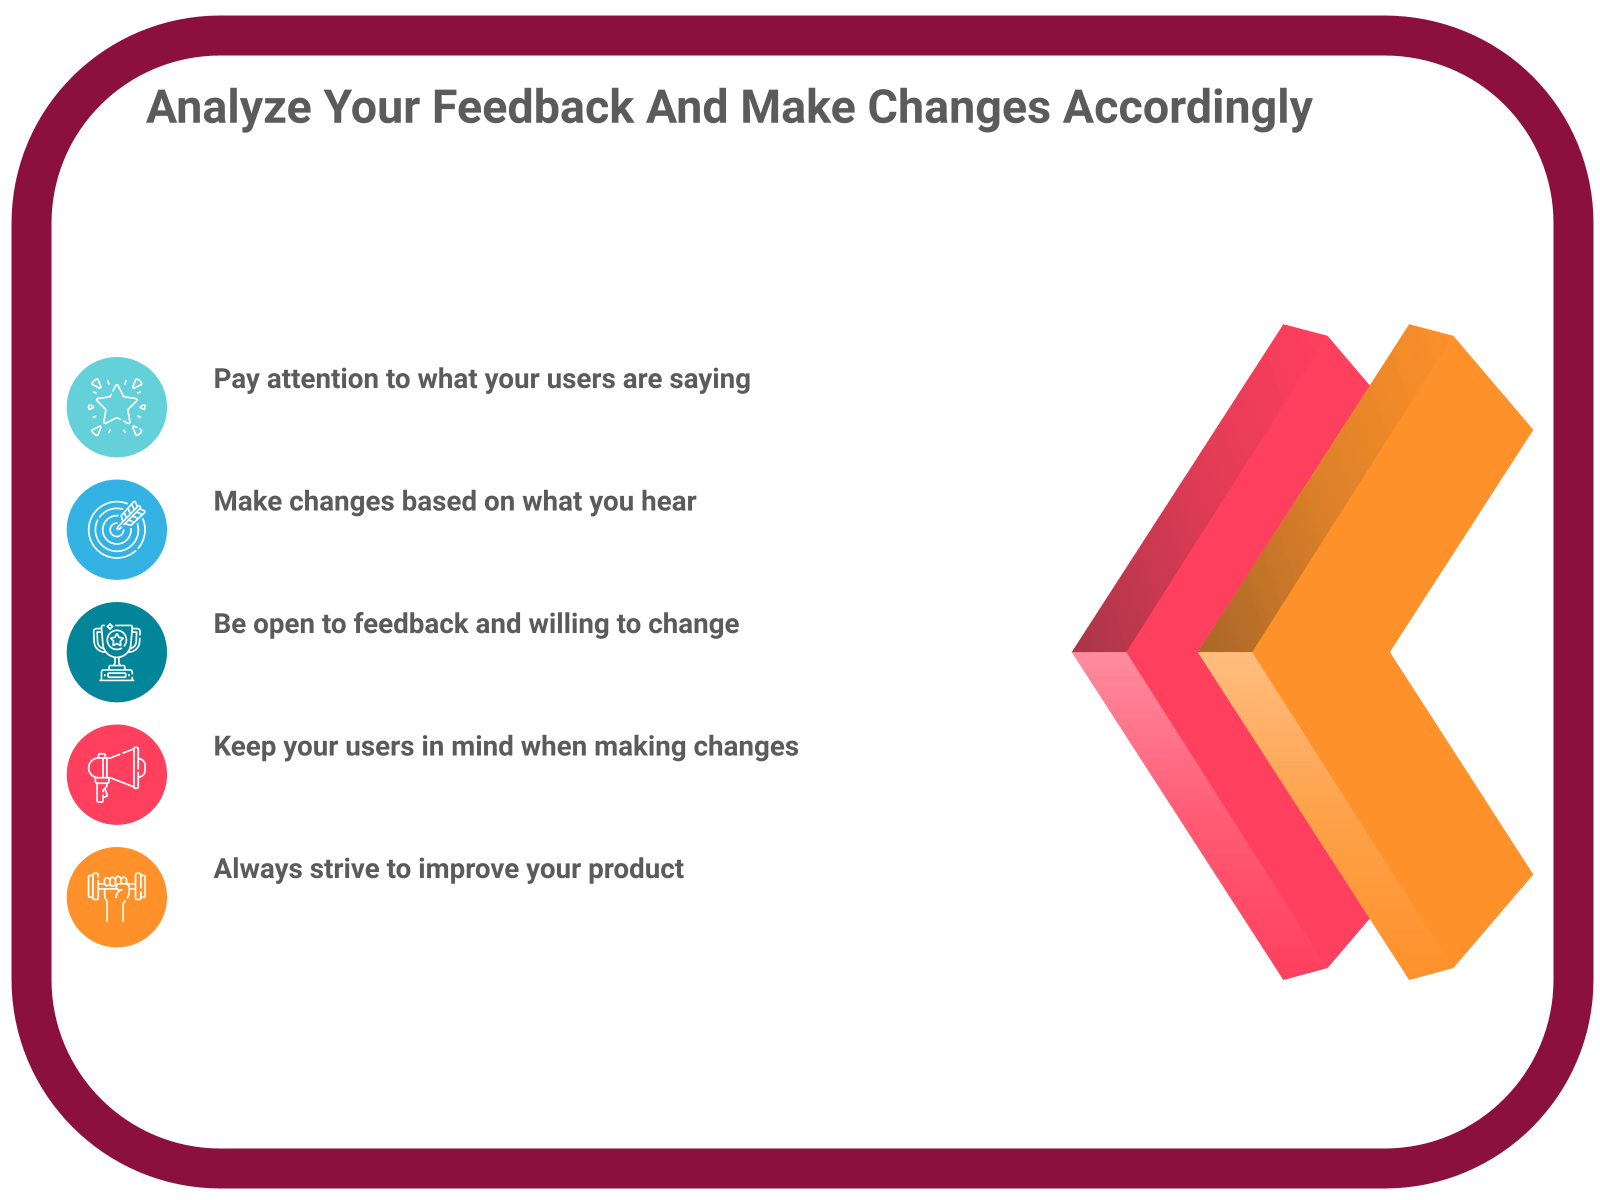 INFOGRAPHIC: Analyze your feedback and make changes accordingly - Poll the People